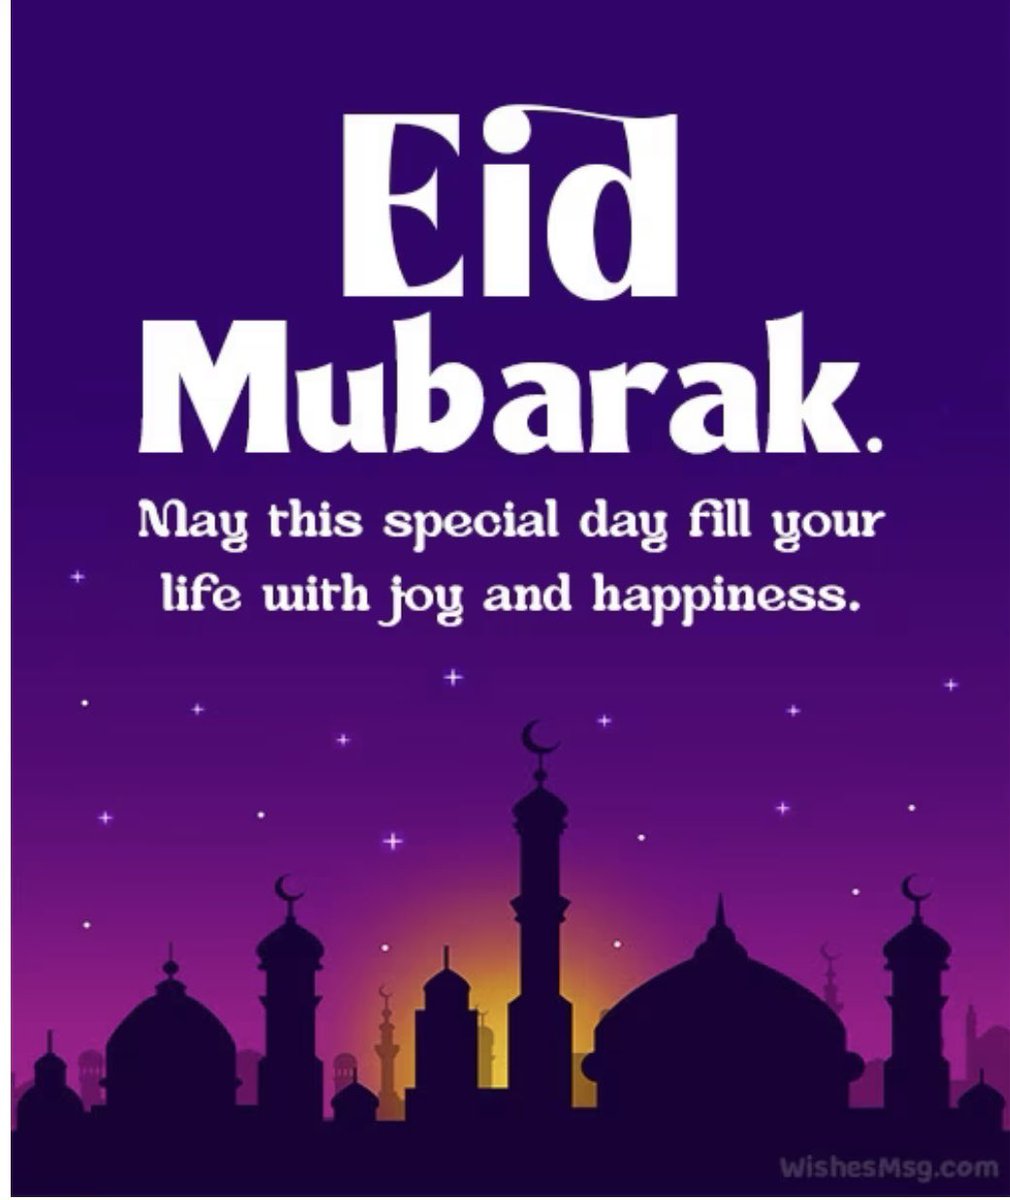 Happy EID Mubarak to our my Muslim friends and family. 🥰💕🙏🏼